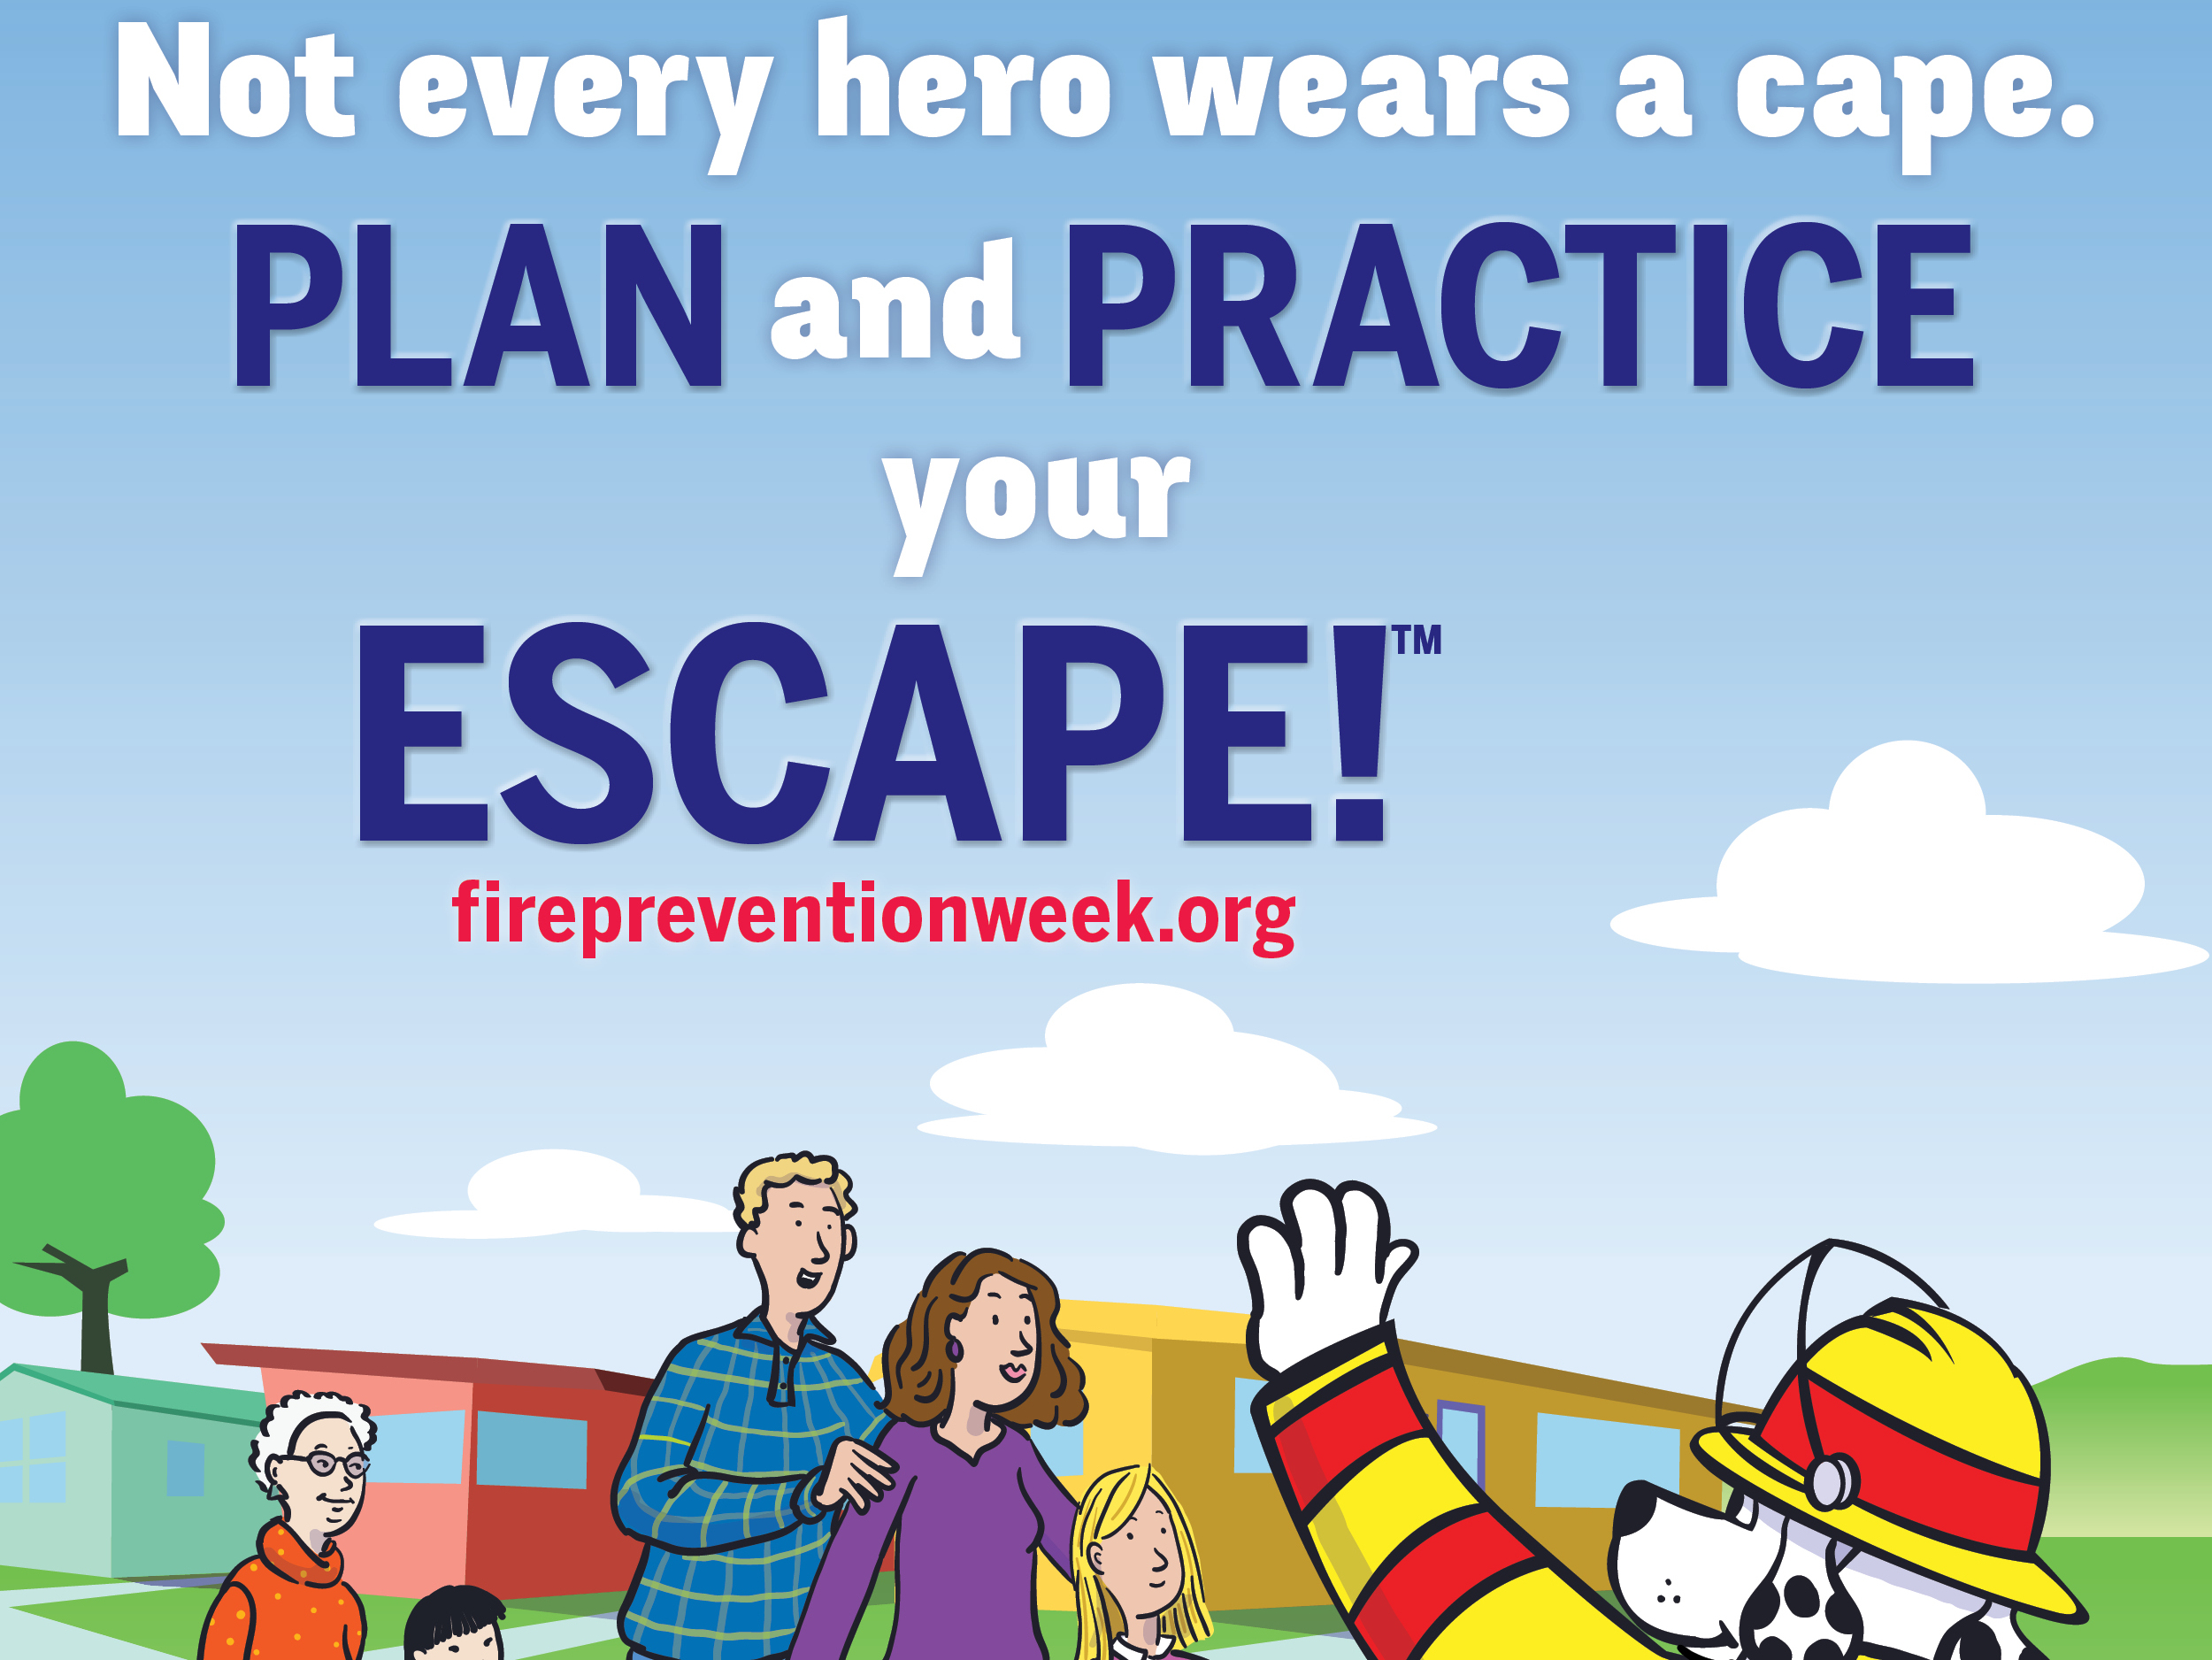 Plan and practice your escape during National Fire Prevention Week